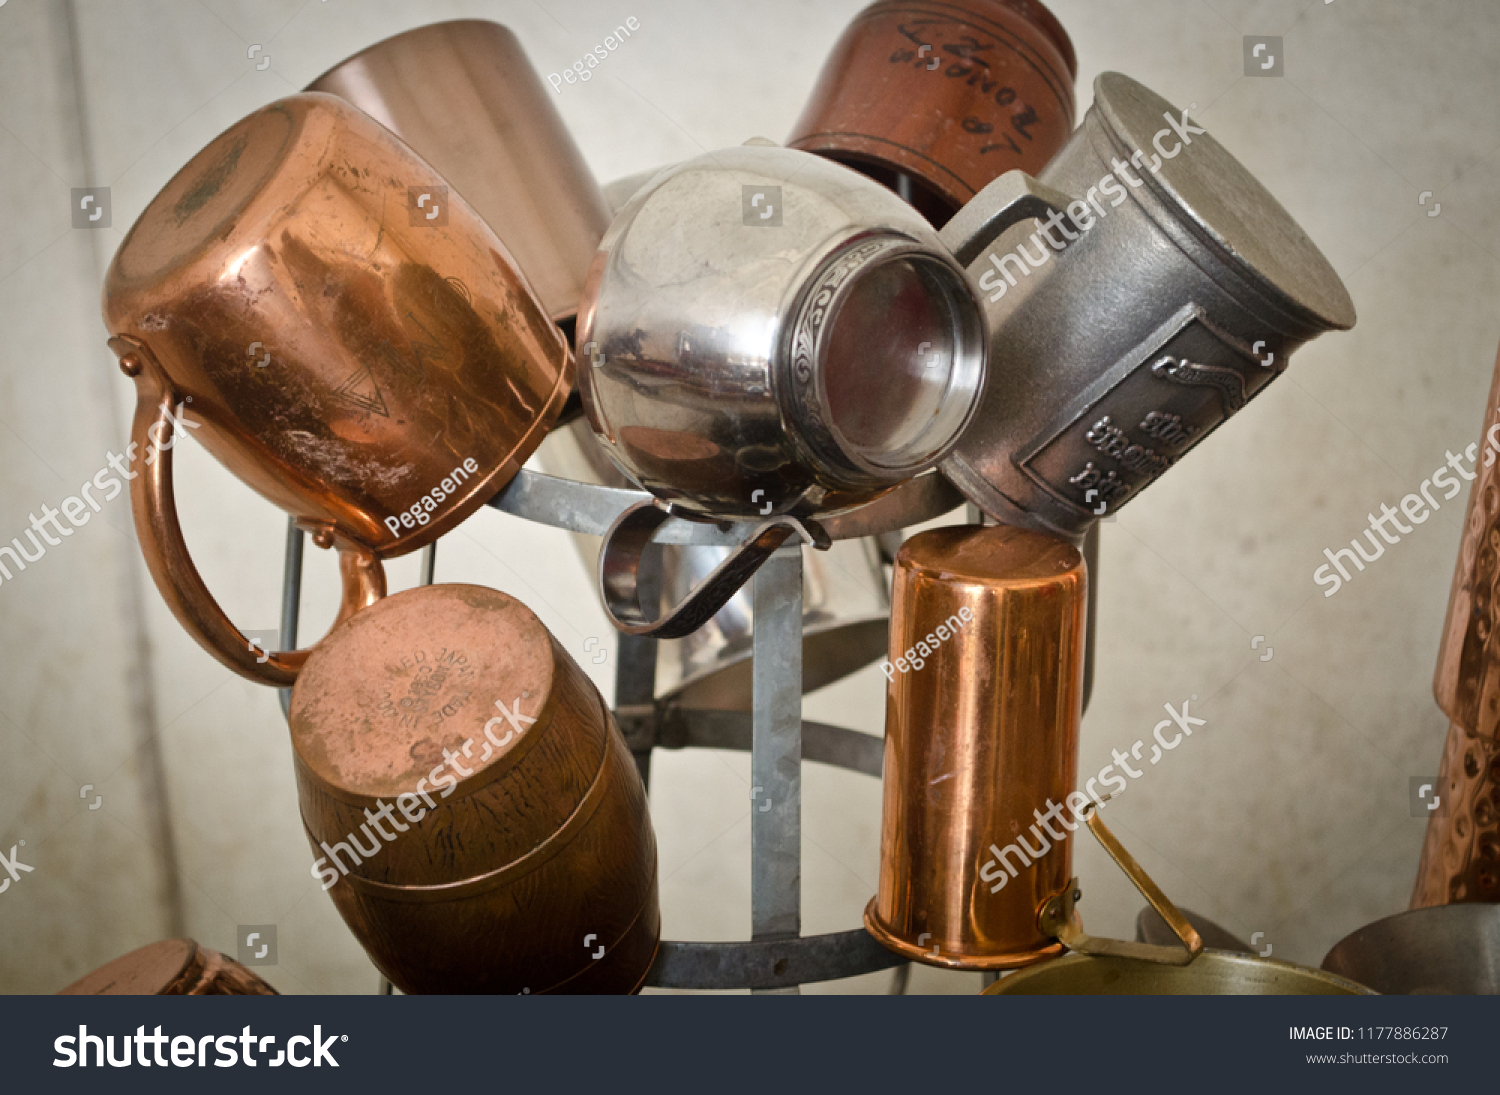 Display tree of pewter silver and copper cups tankards with a rustic white canvas background. #1177886287